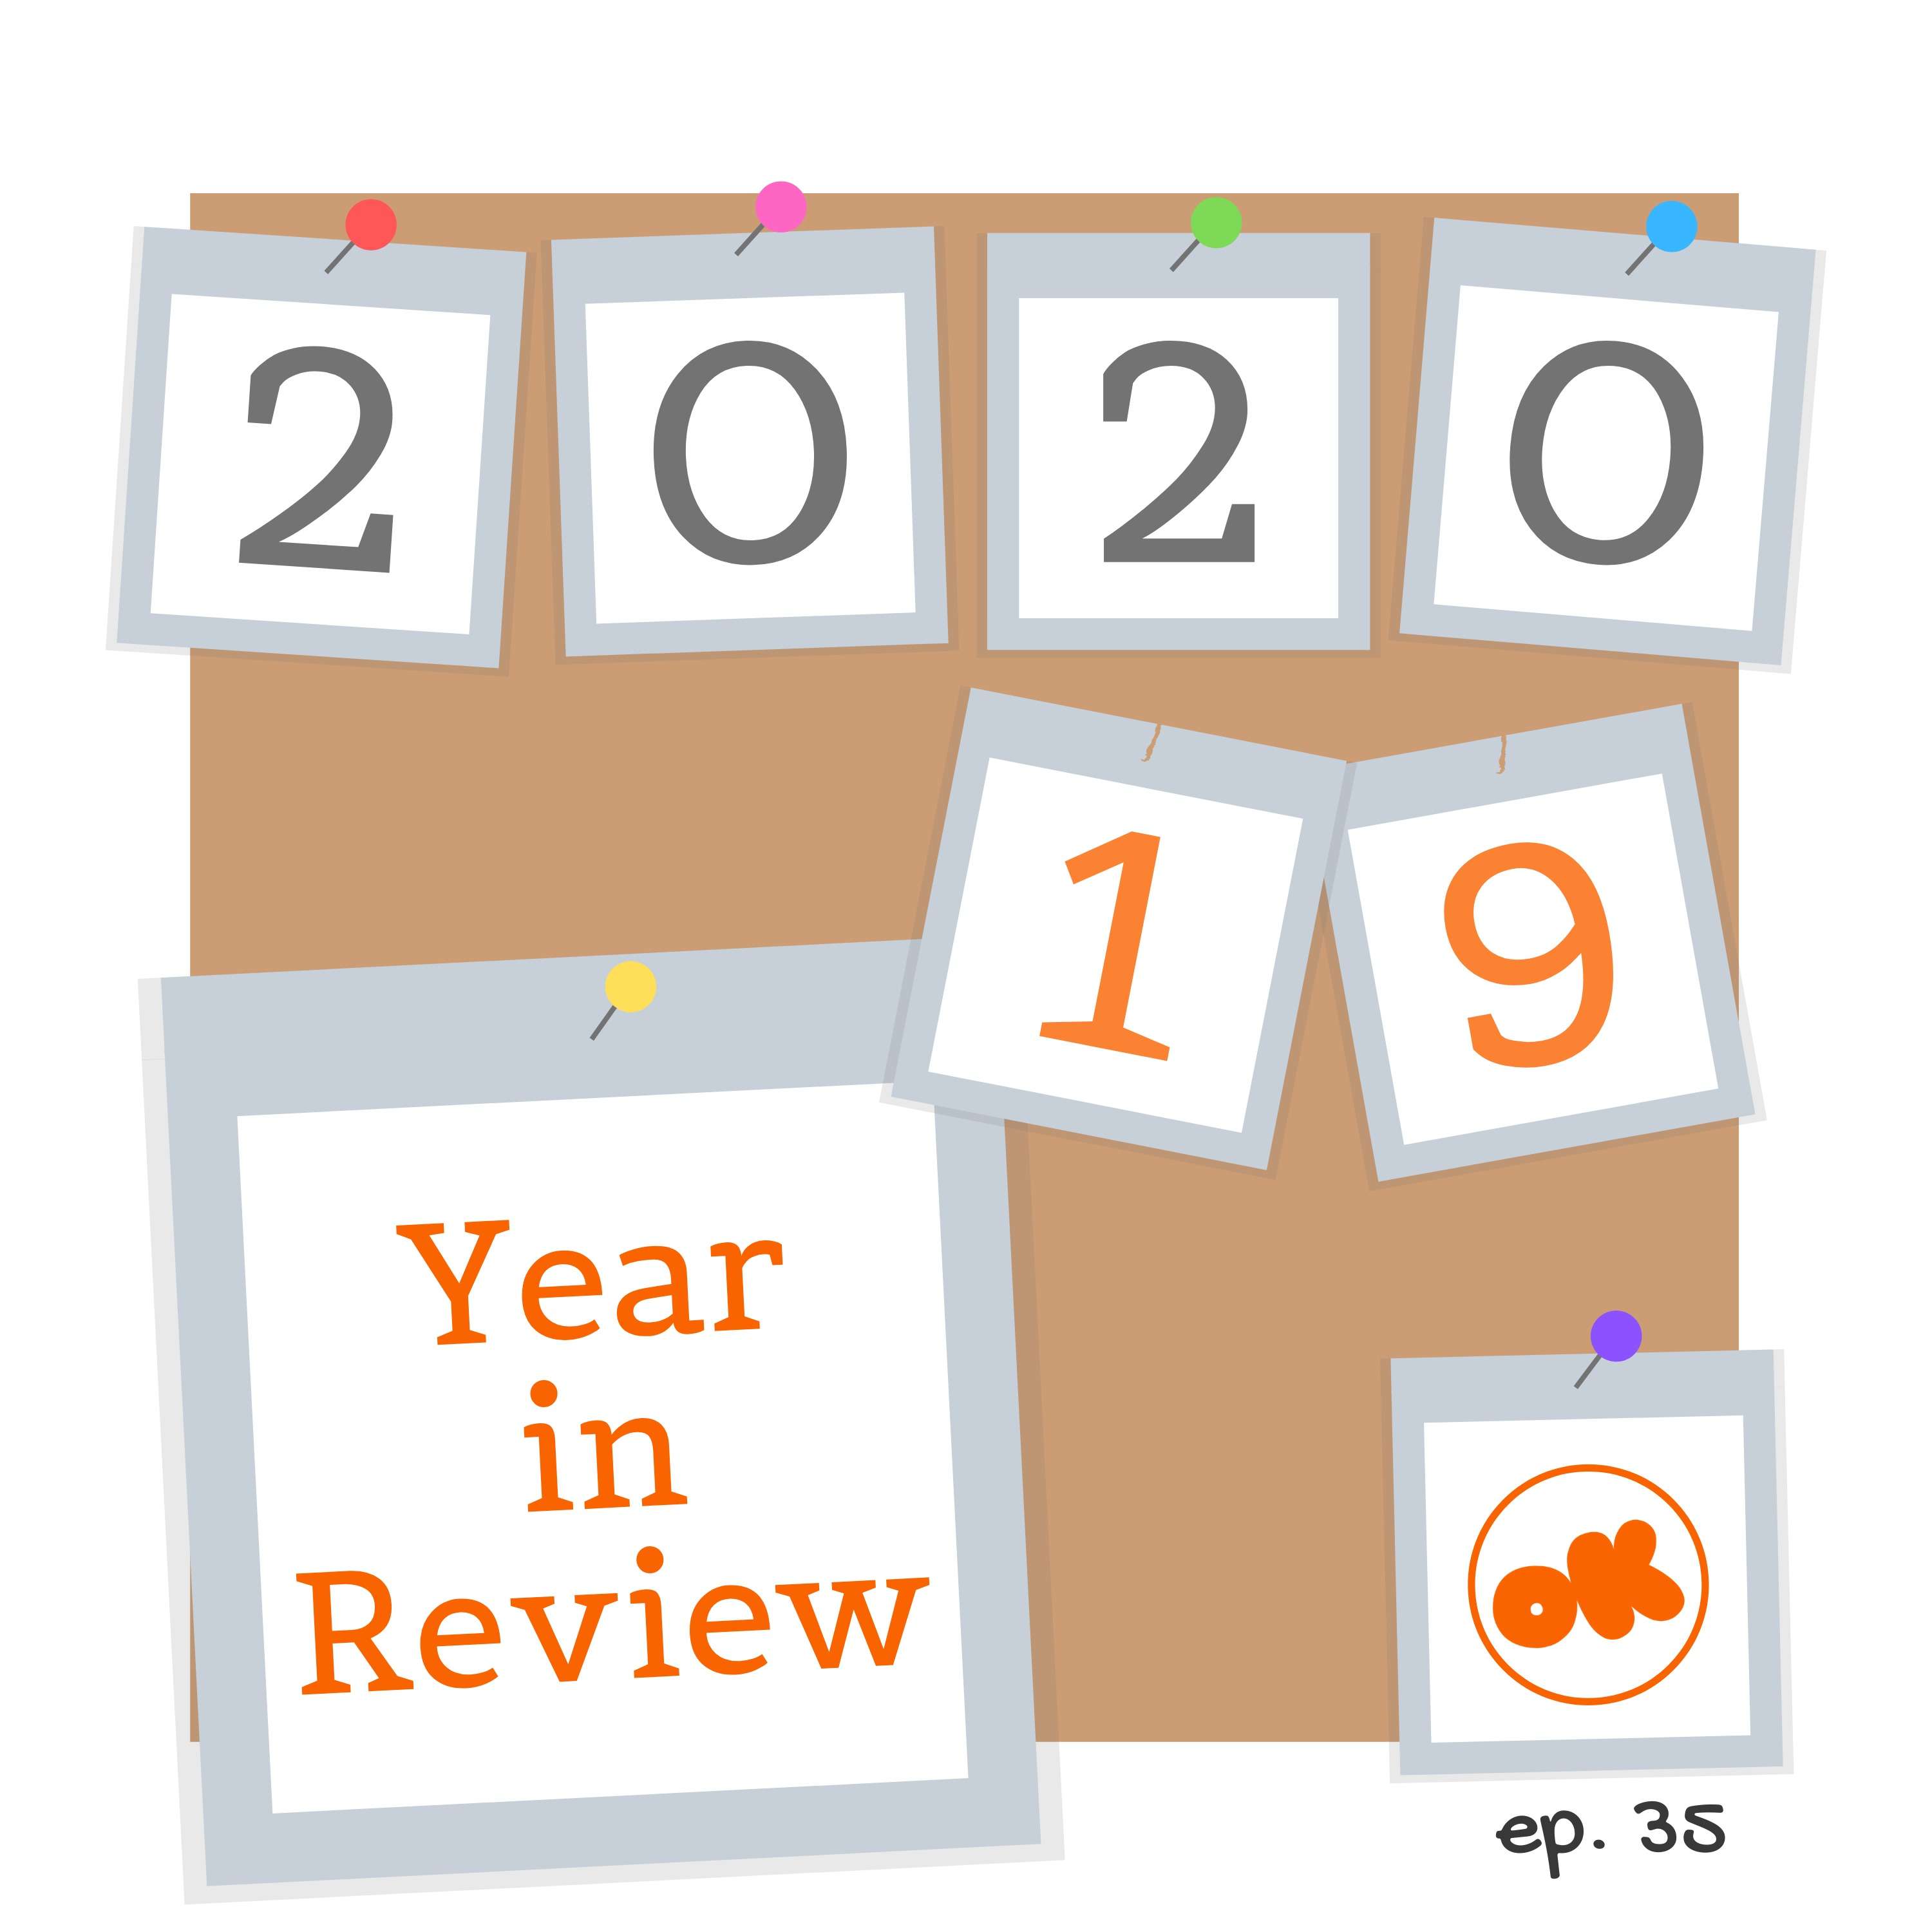 035. Year in Review, 2019